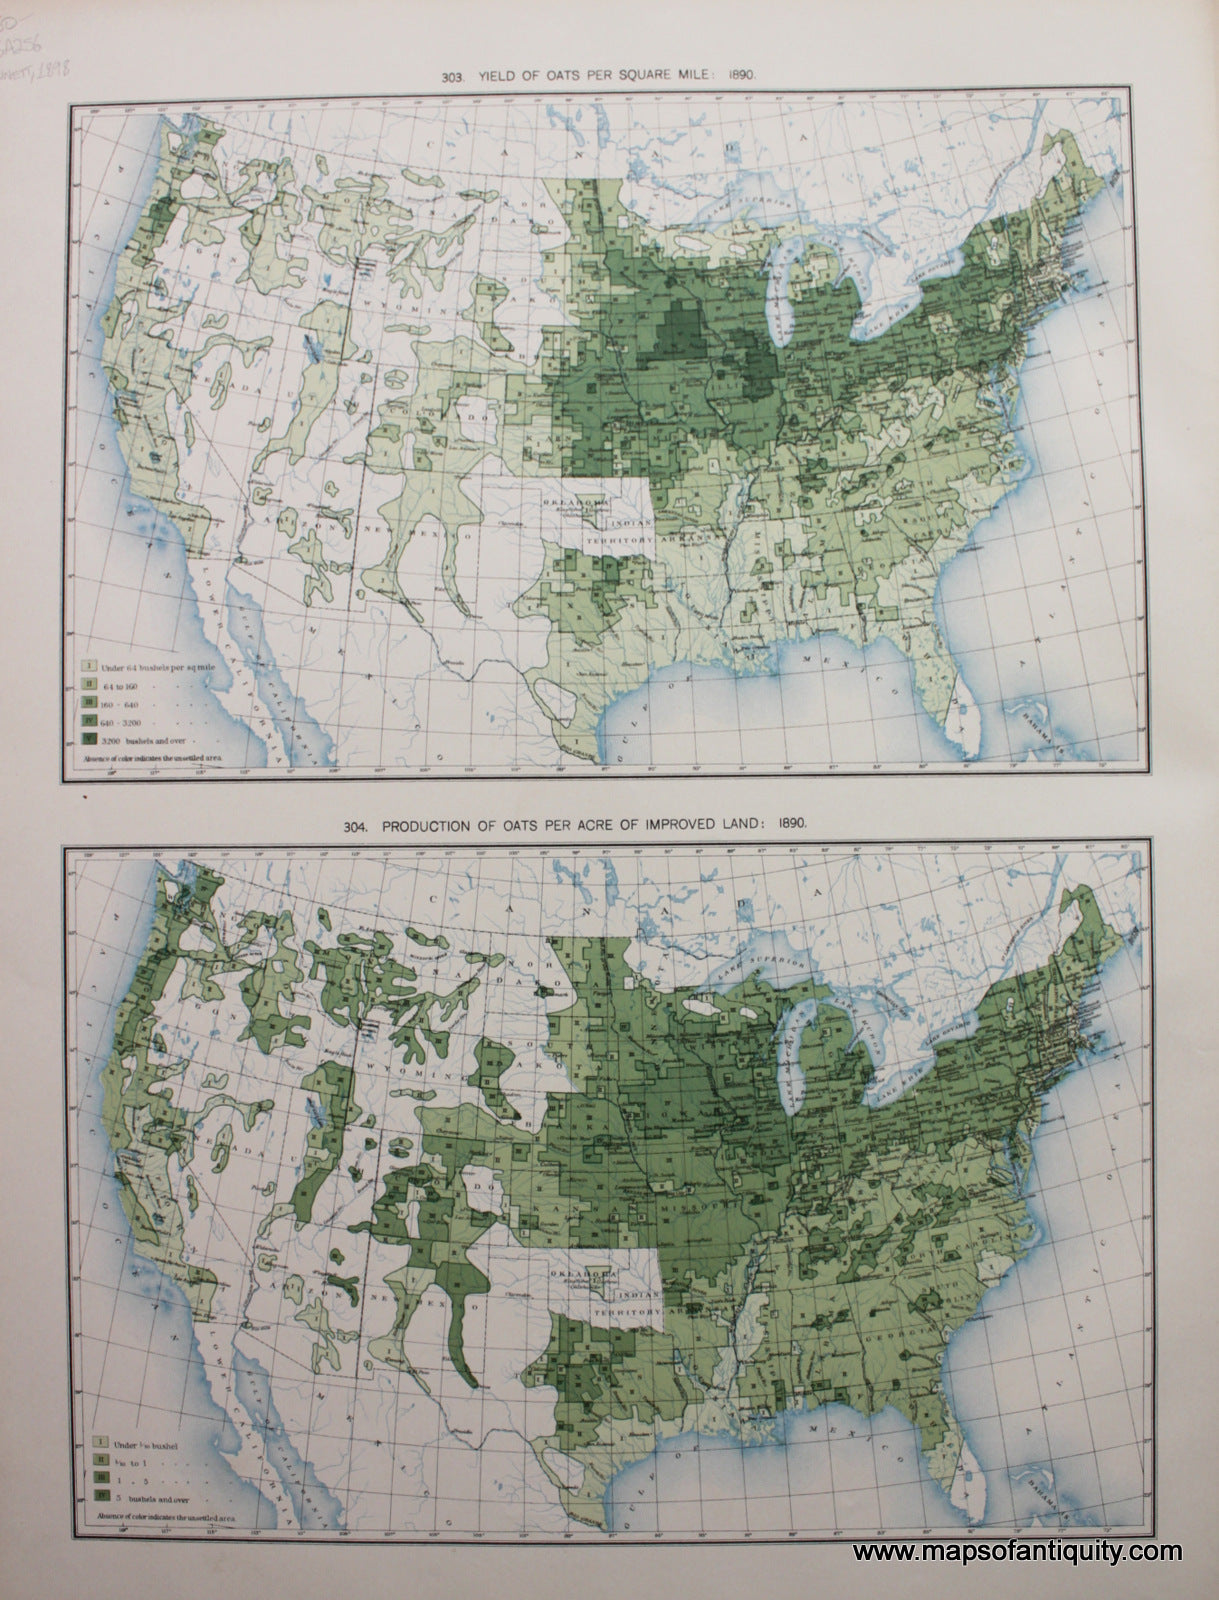 Antique-Printed-Color-Map-Yield-of-Oats-Per-Square-Mile:-1890/-Production-of-Oats-Per-Acre-of-Improved-Land:-1890-United-States-United-States-General-1898-Gannett-Maps-Of-Antiquity